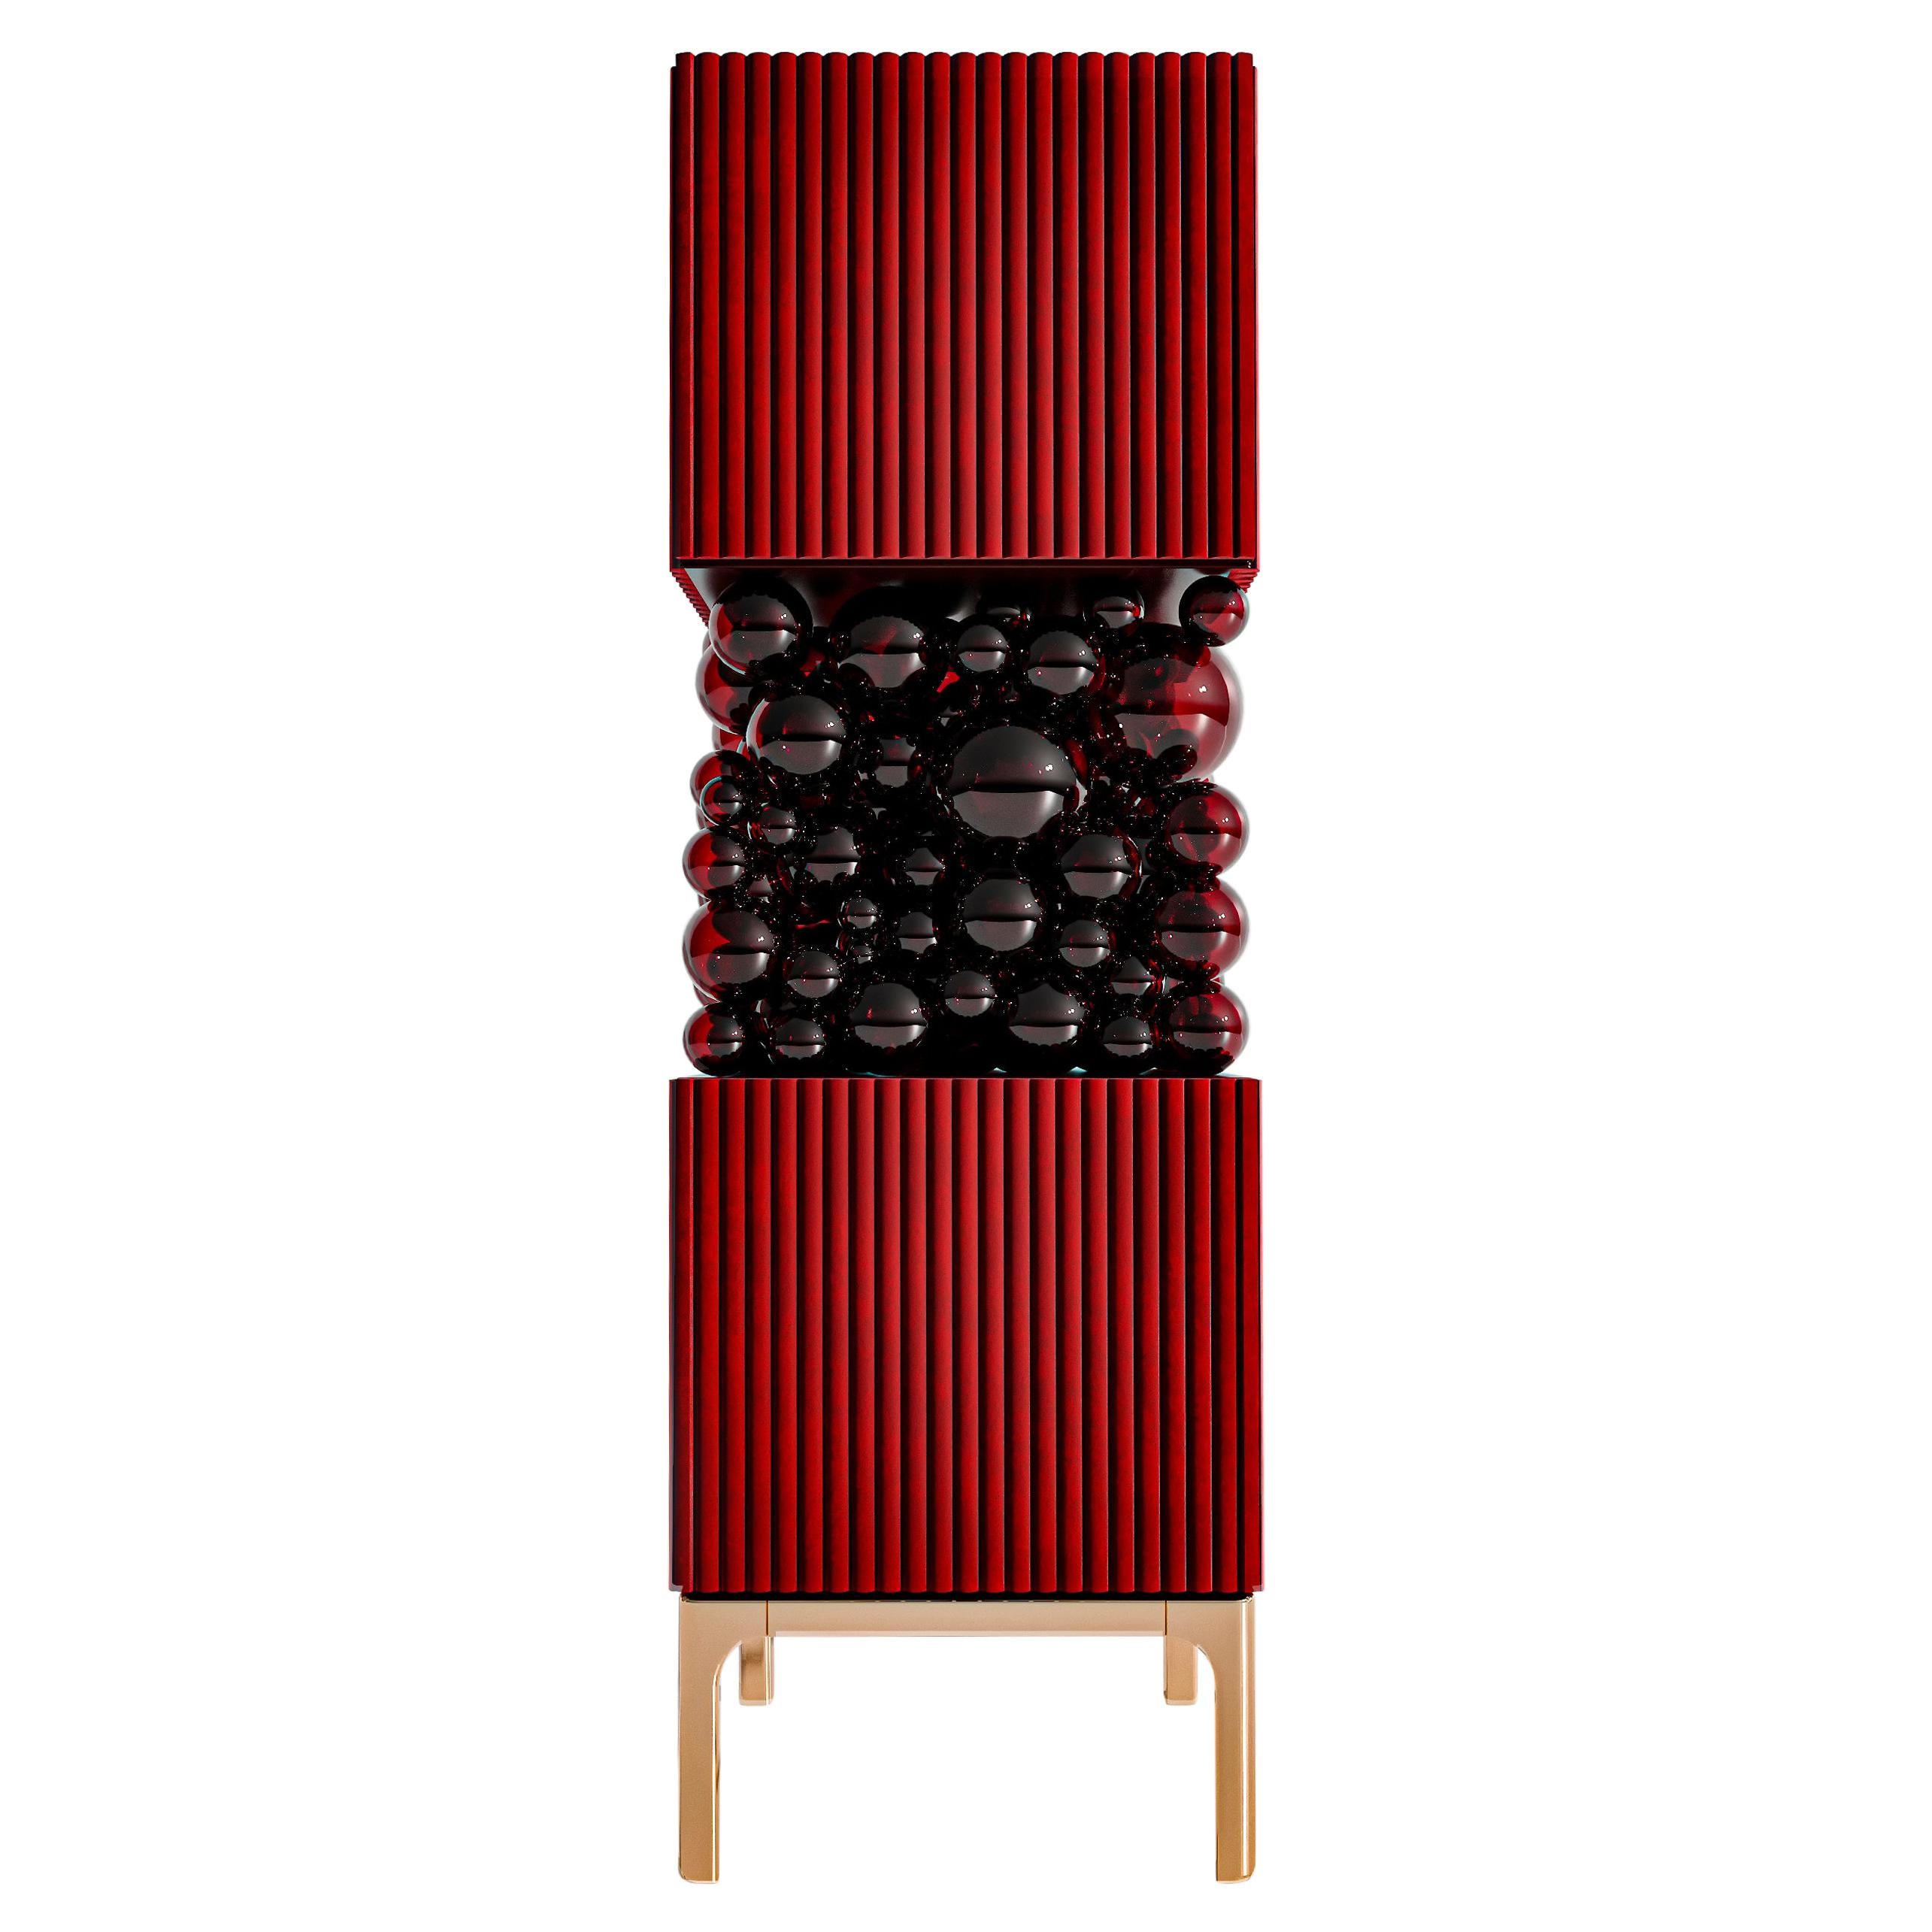 Dark-Red Cabinet, Bubbles Collection, Amazing Emotional Design for Your Interior For Sale